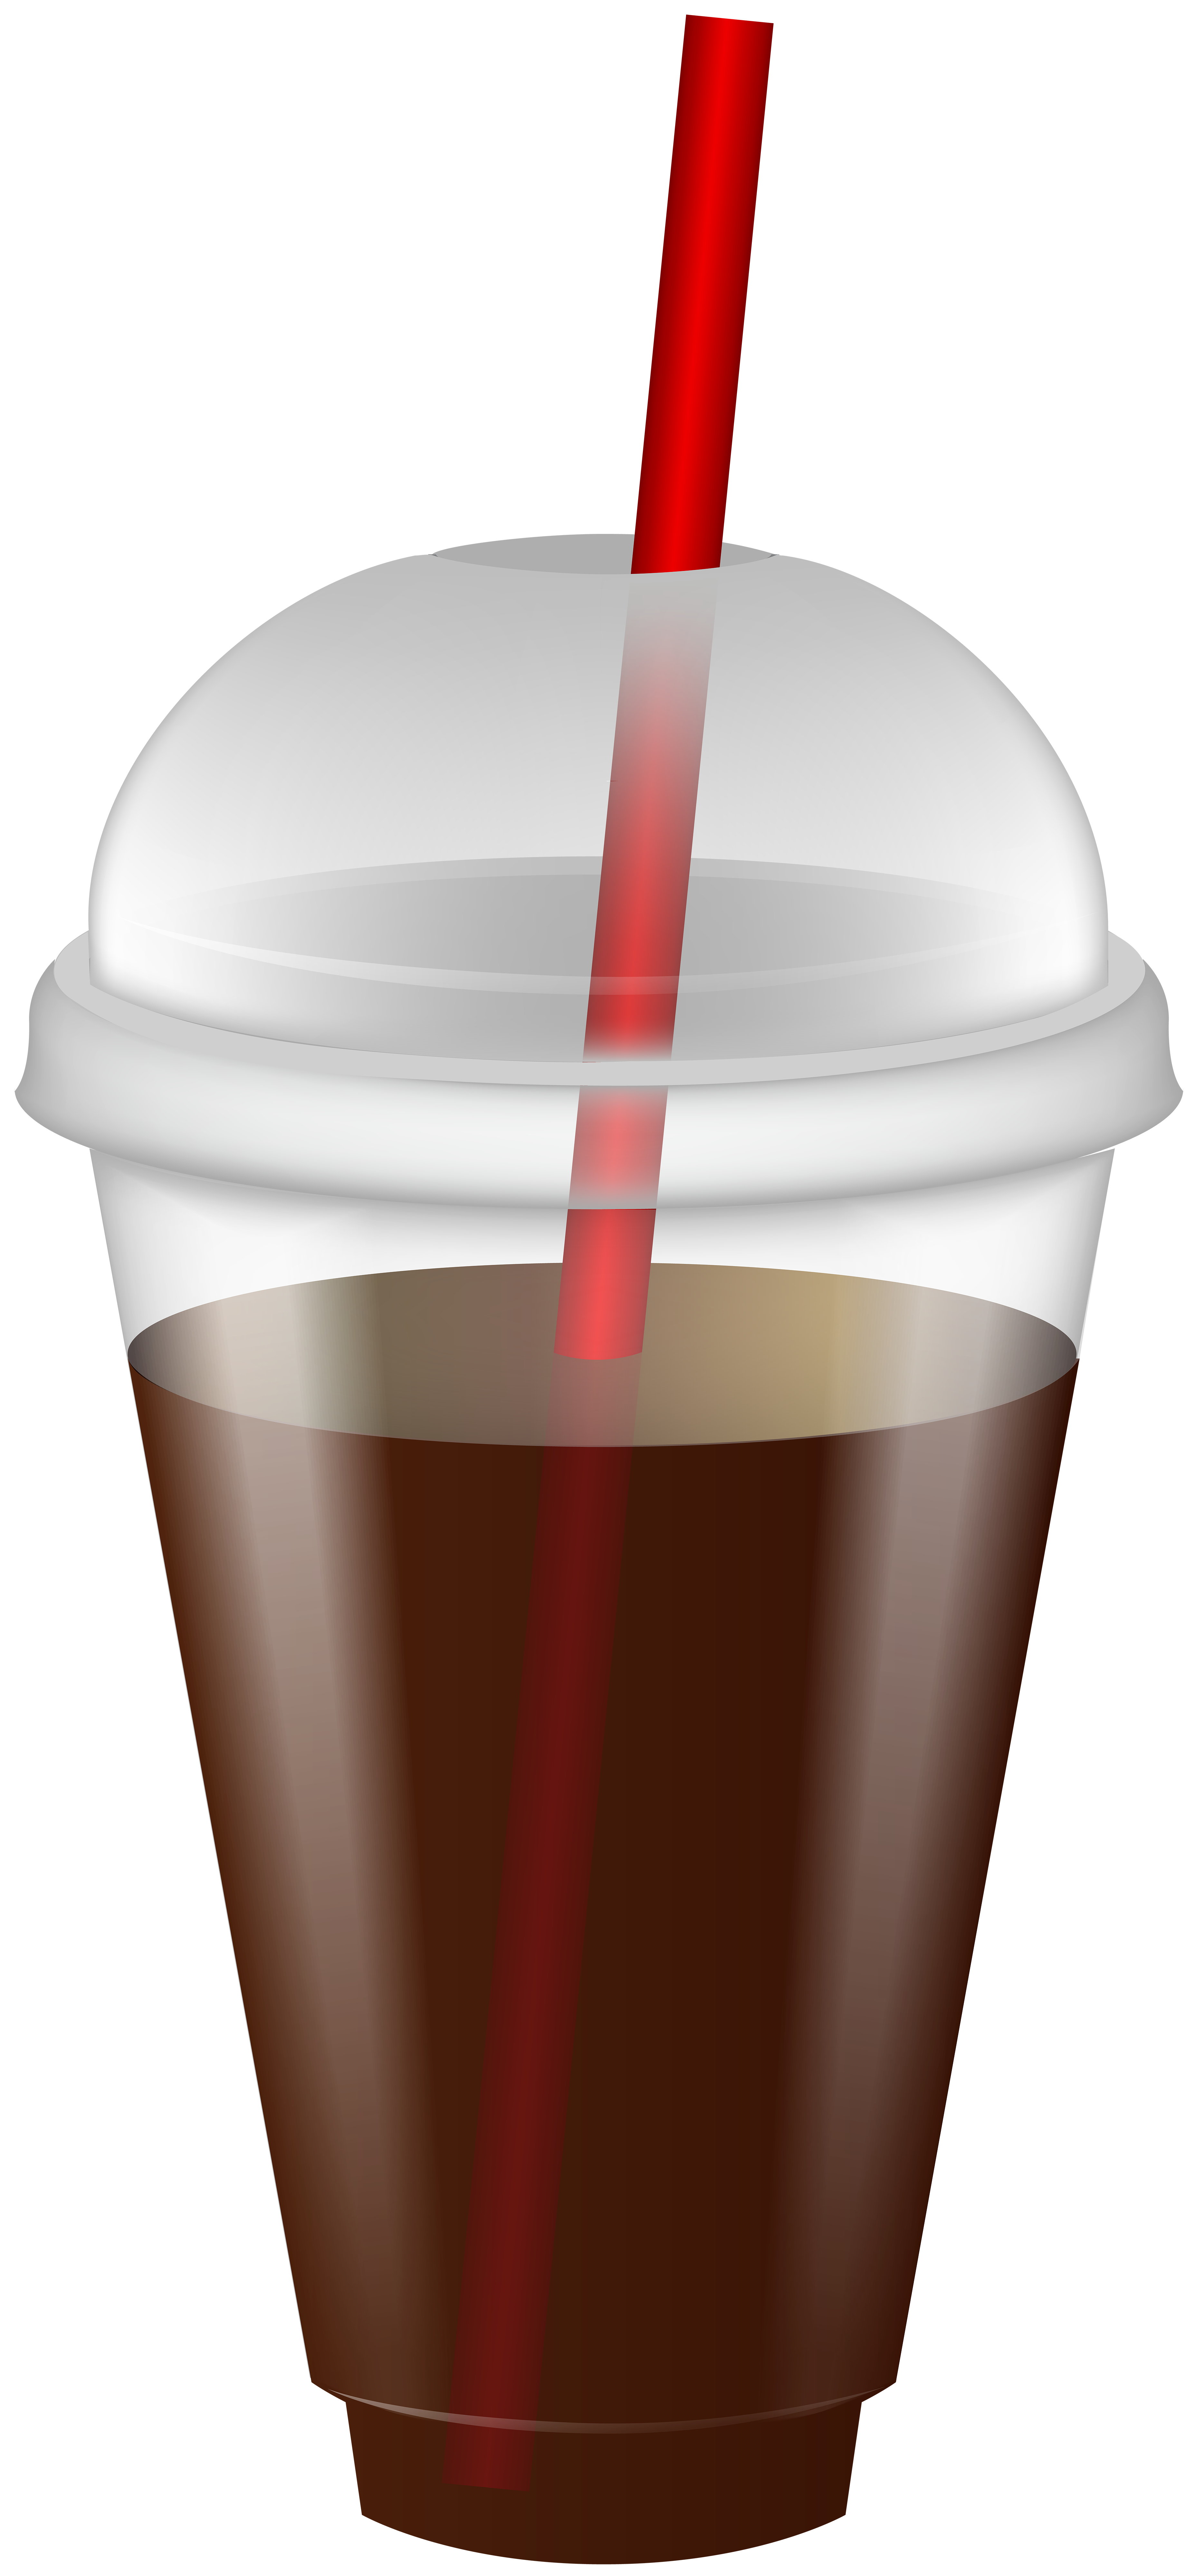 Free Drink Cup Cliparts, Download Free Drink Cup Cliparts png images